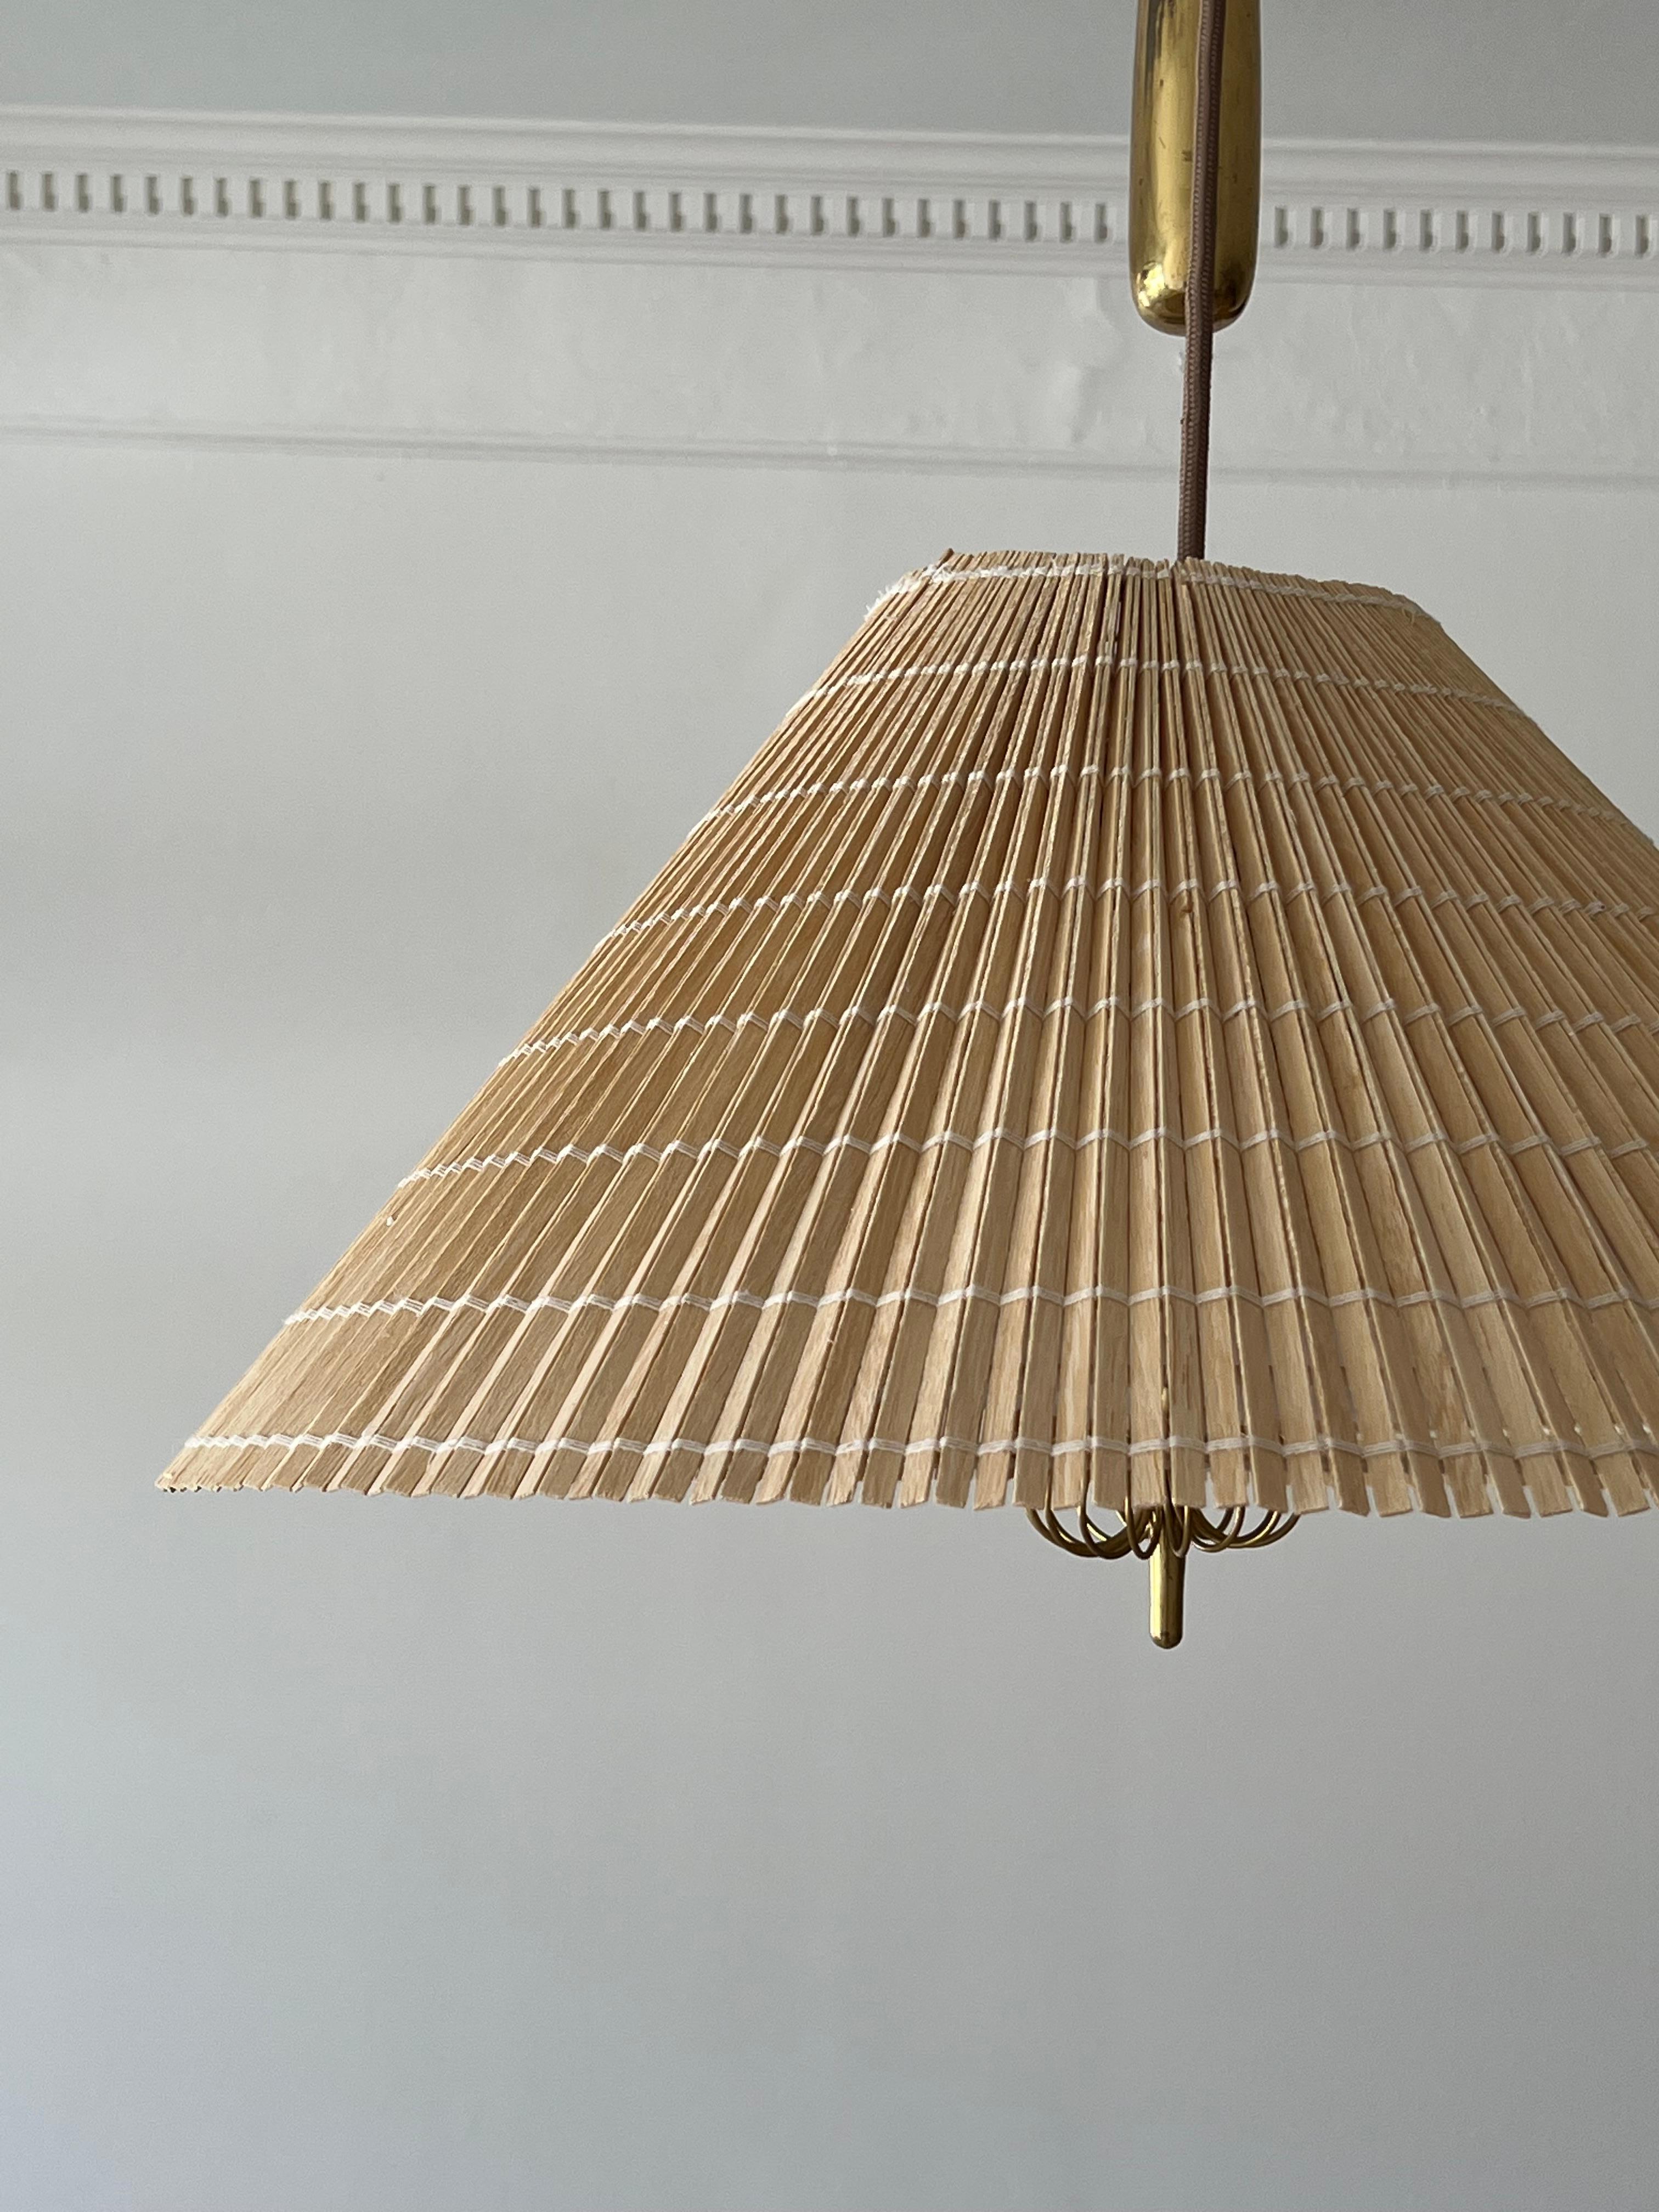 Finnish Paavo Tynell, Counter-Weight Pendant, Brass, Paper, Reed, Taito, Finland, 1940s